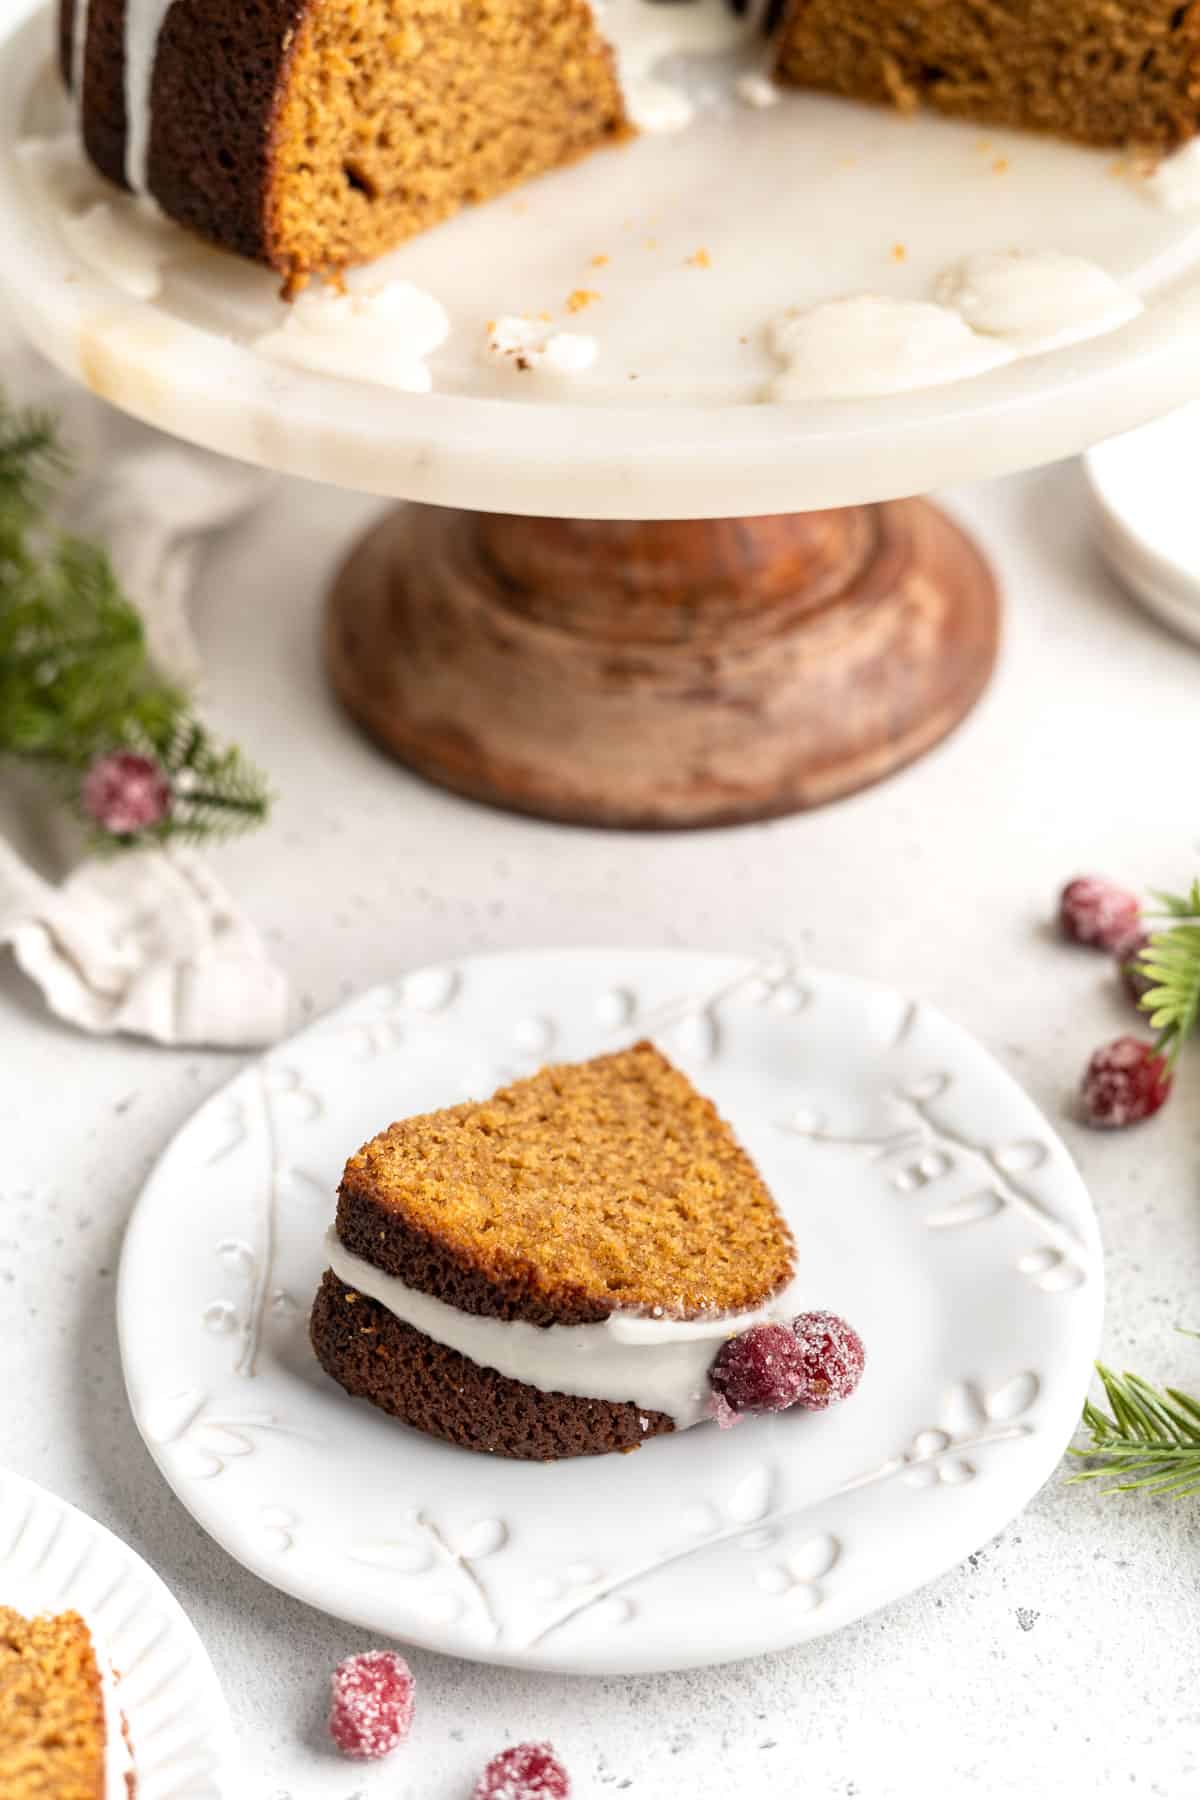 A slice of gingerbread cake on white plate